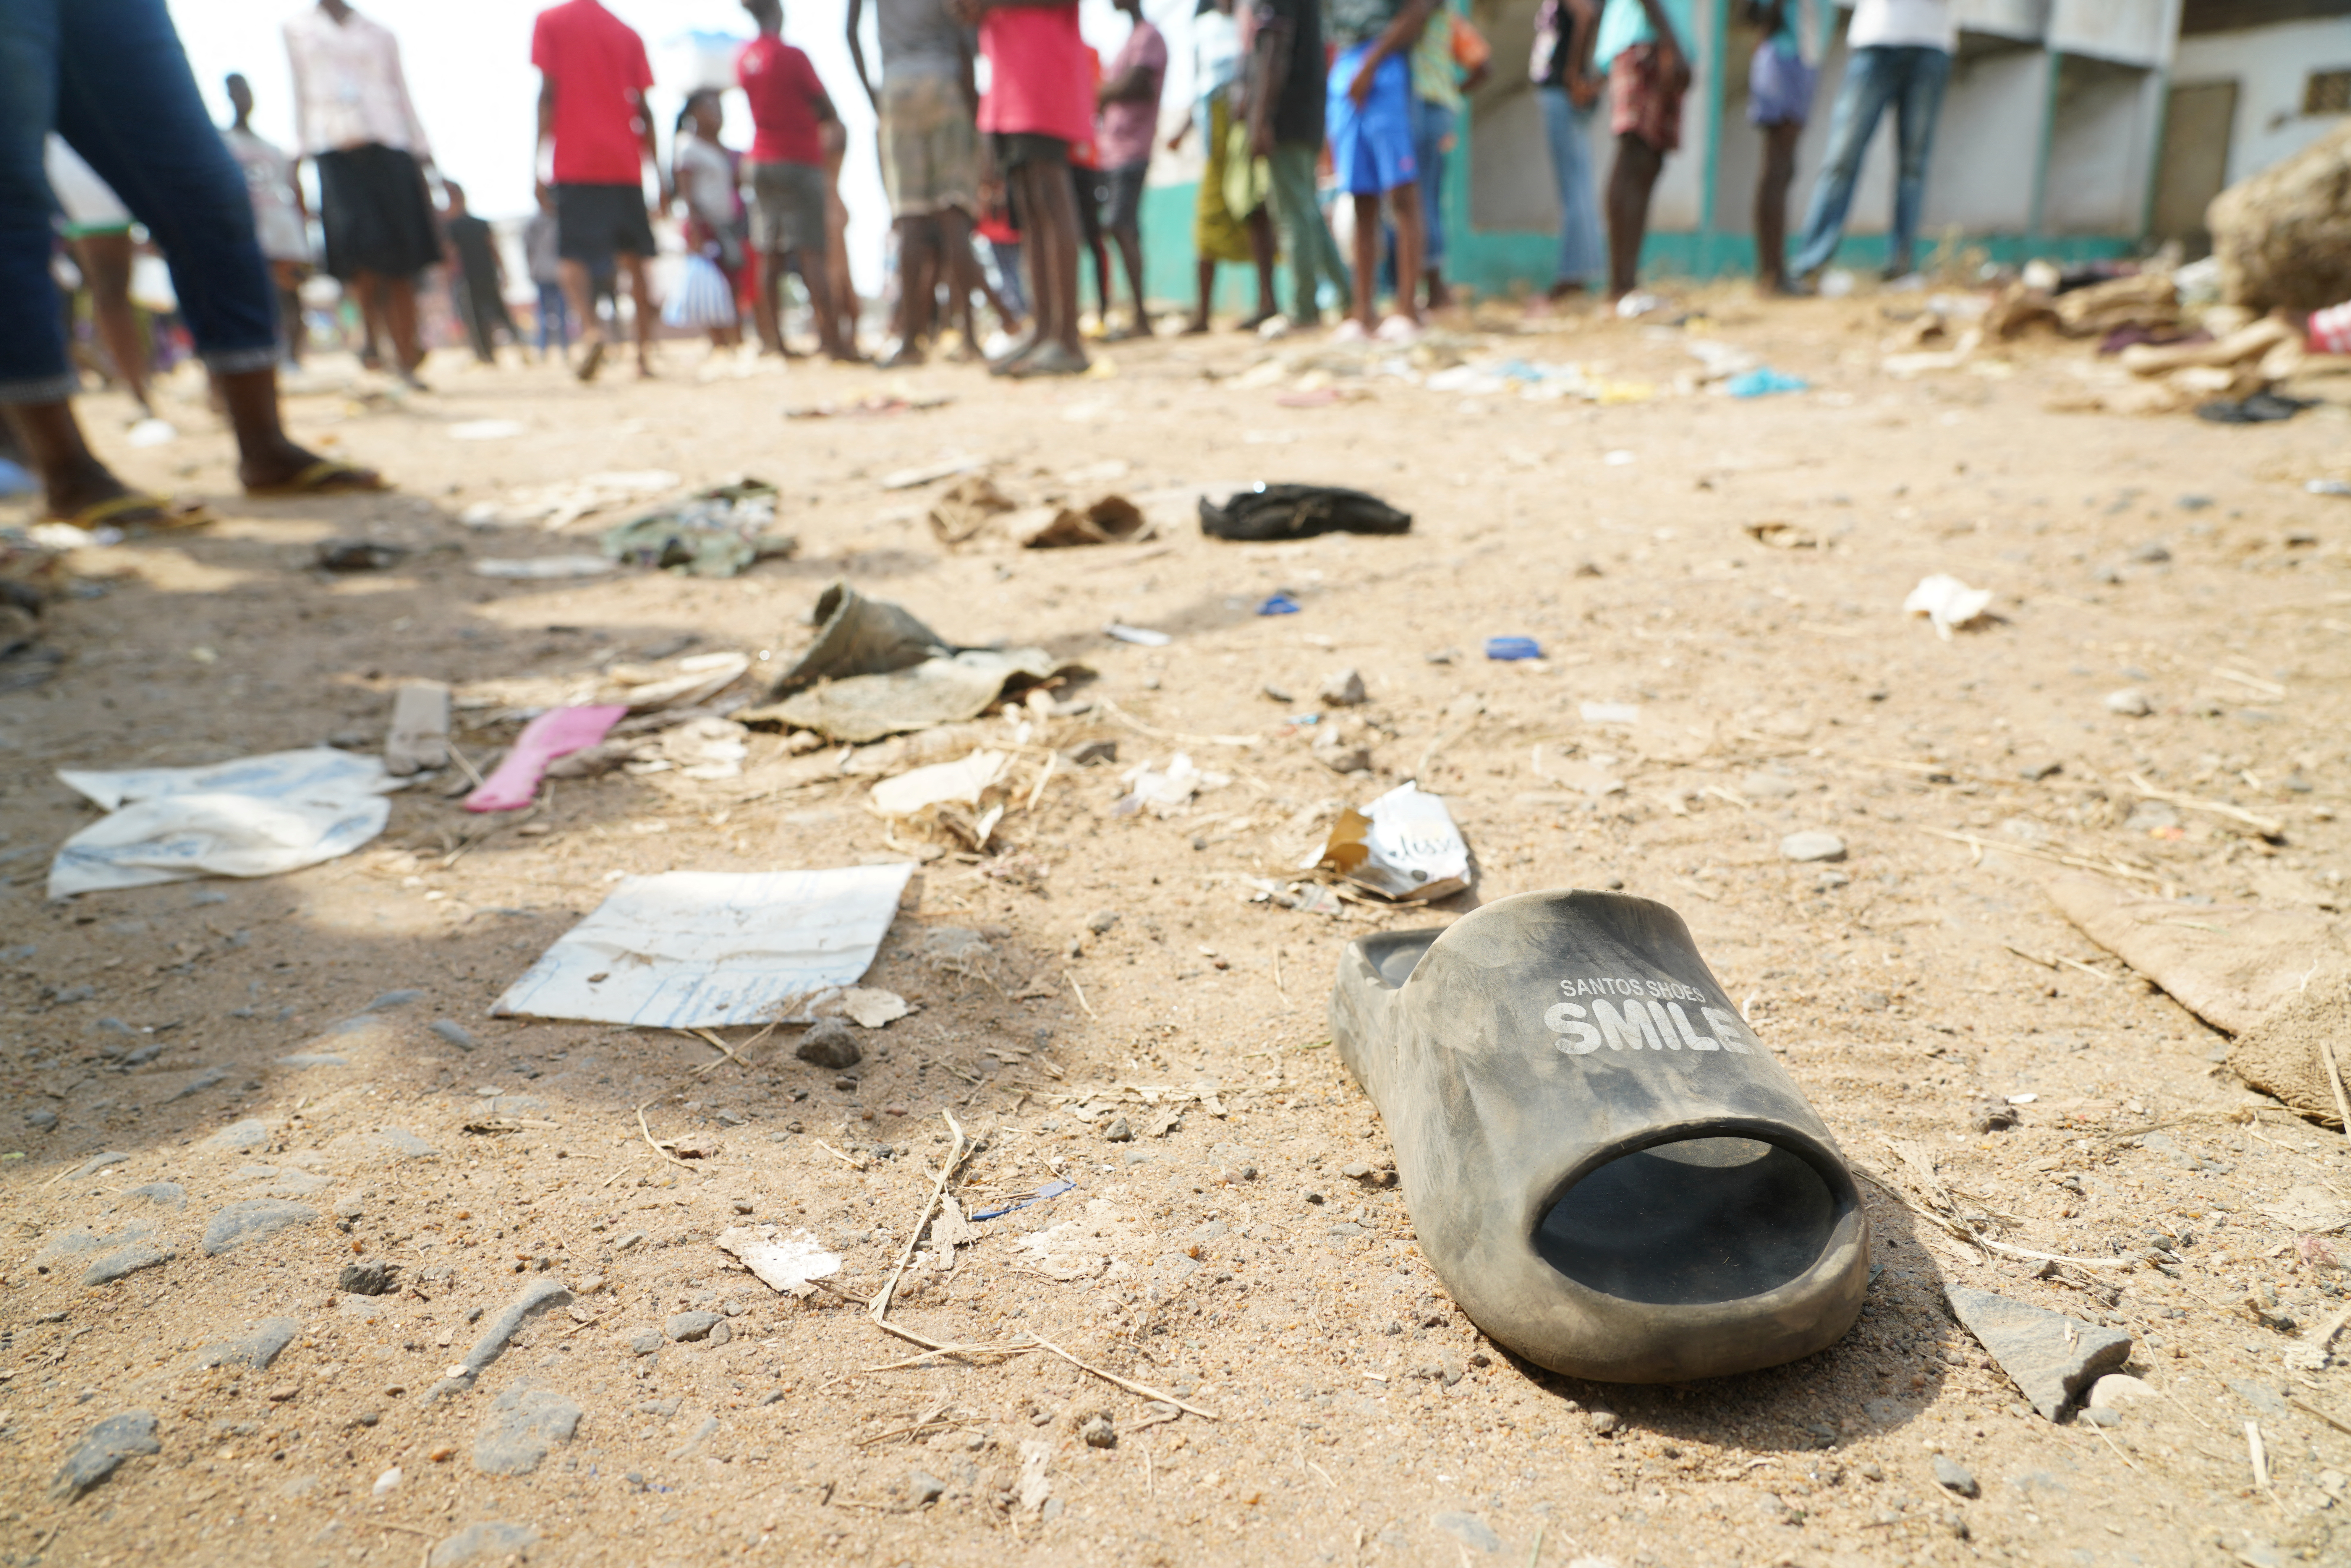 A shoe is pictured on the ground after a stampede at a church gathering killed 29 people in Monrovia